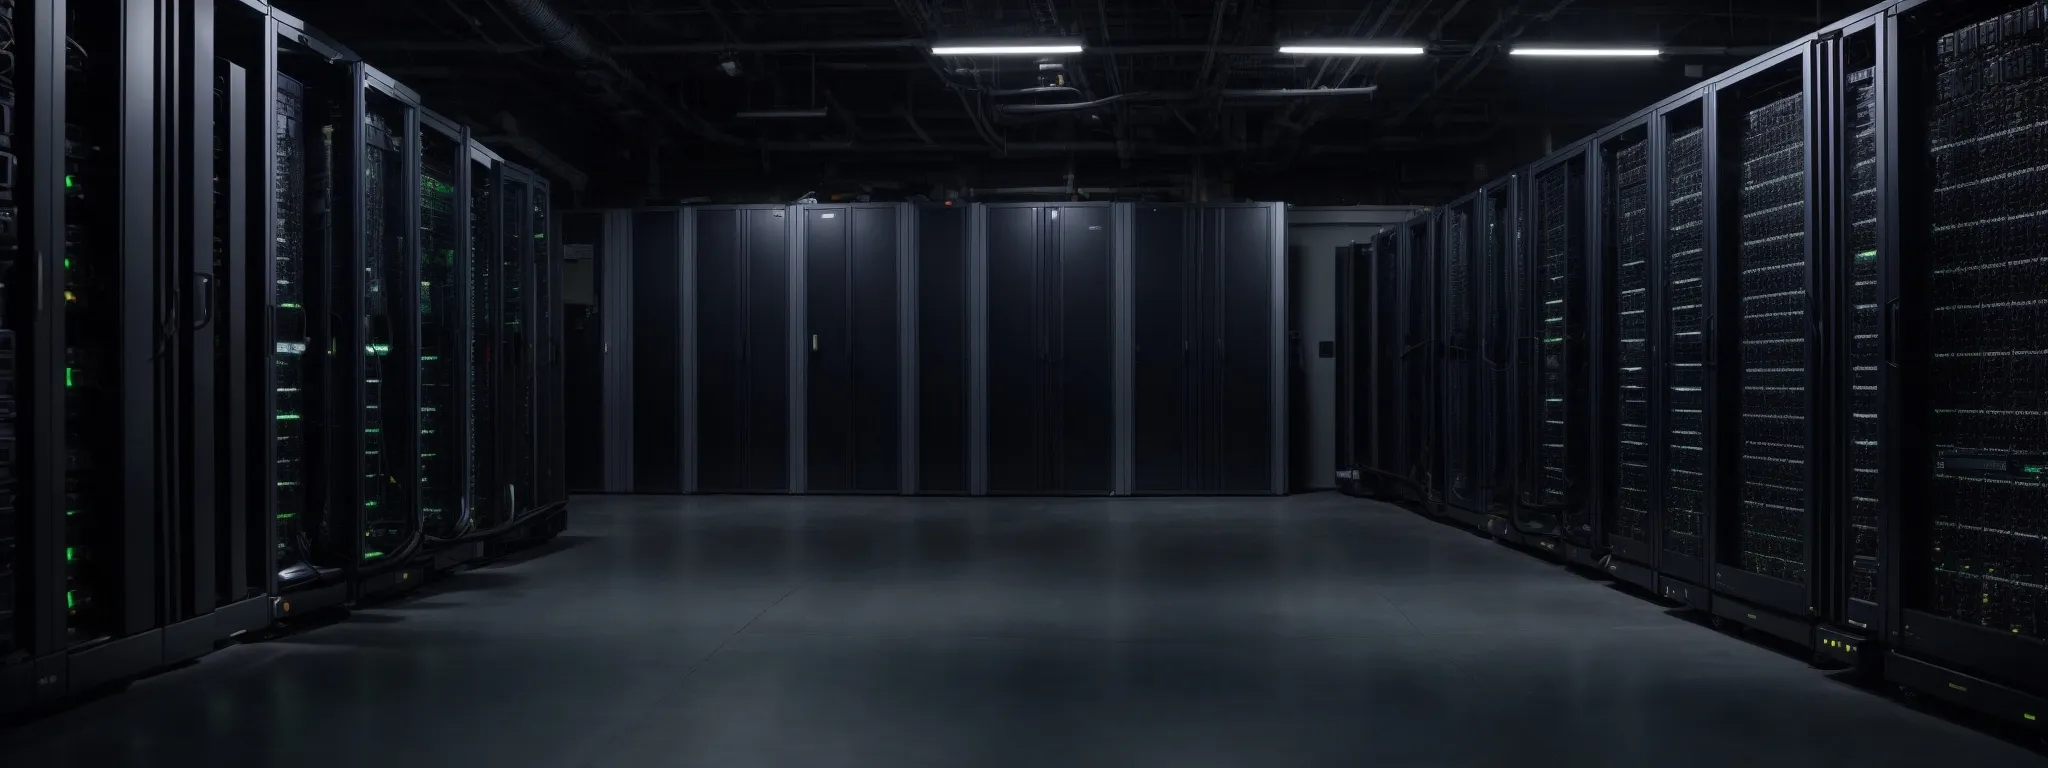 a server room with rows of computer racks, indicative of the infrastructure enabling website indexing and seo optimization.